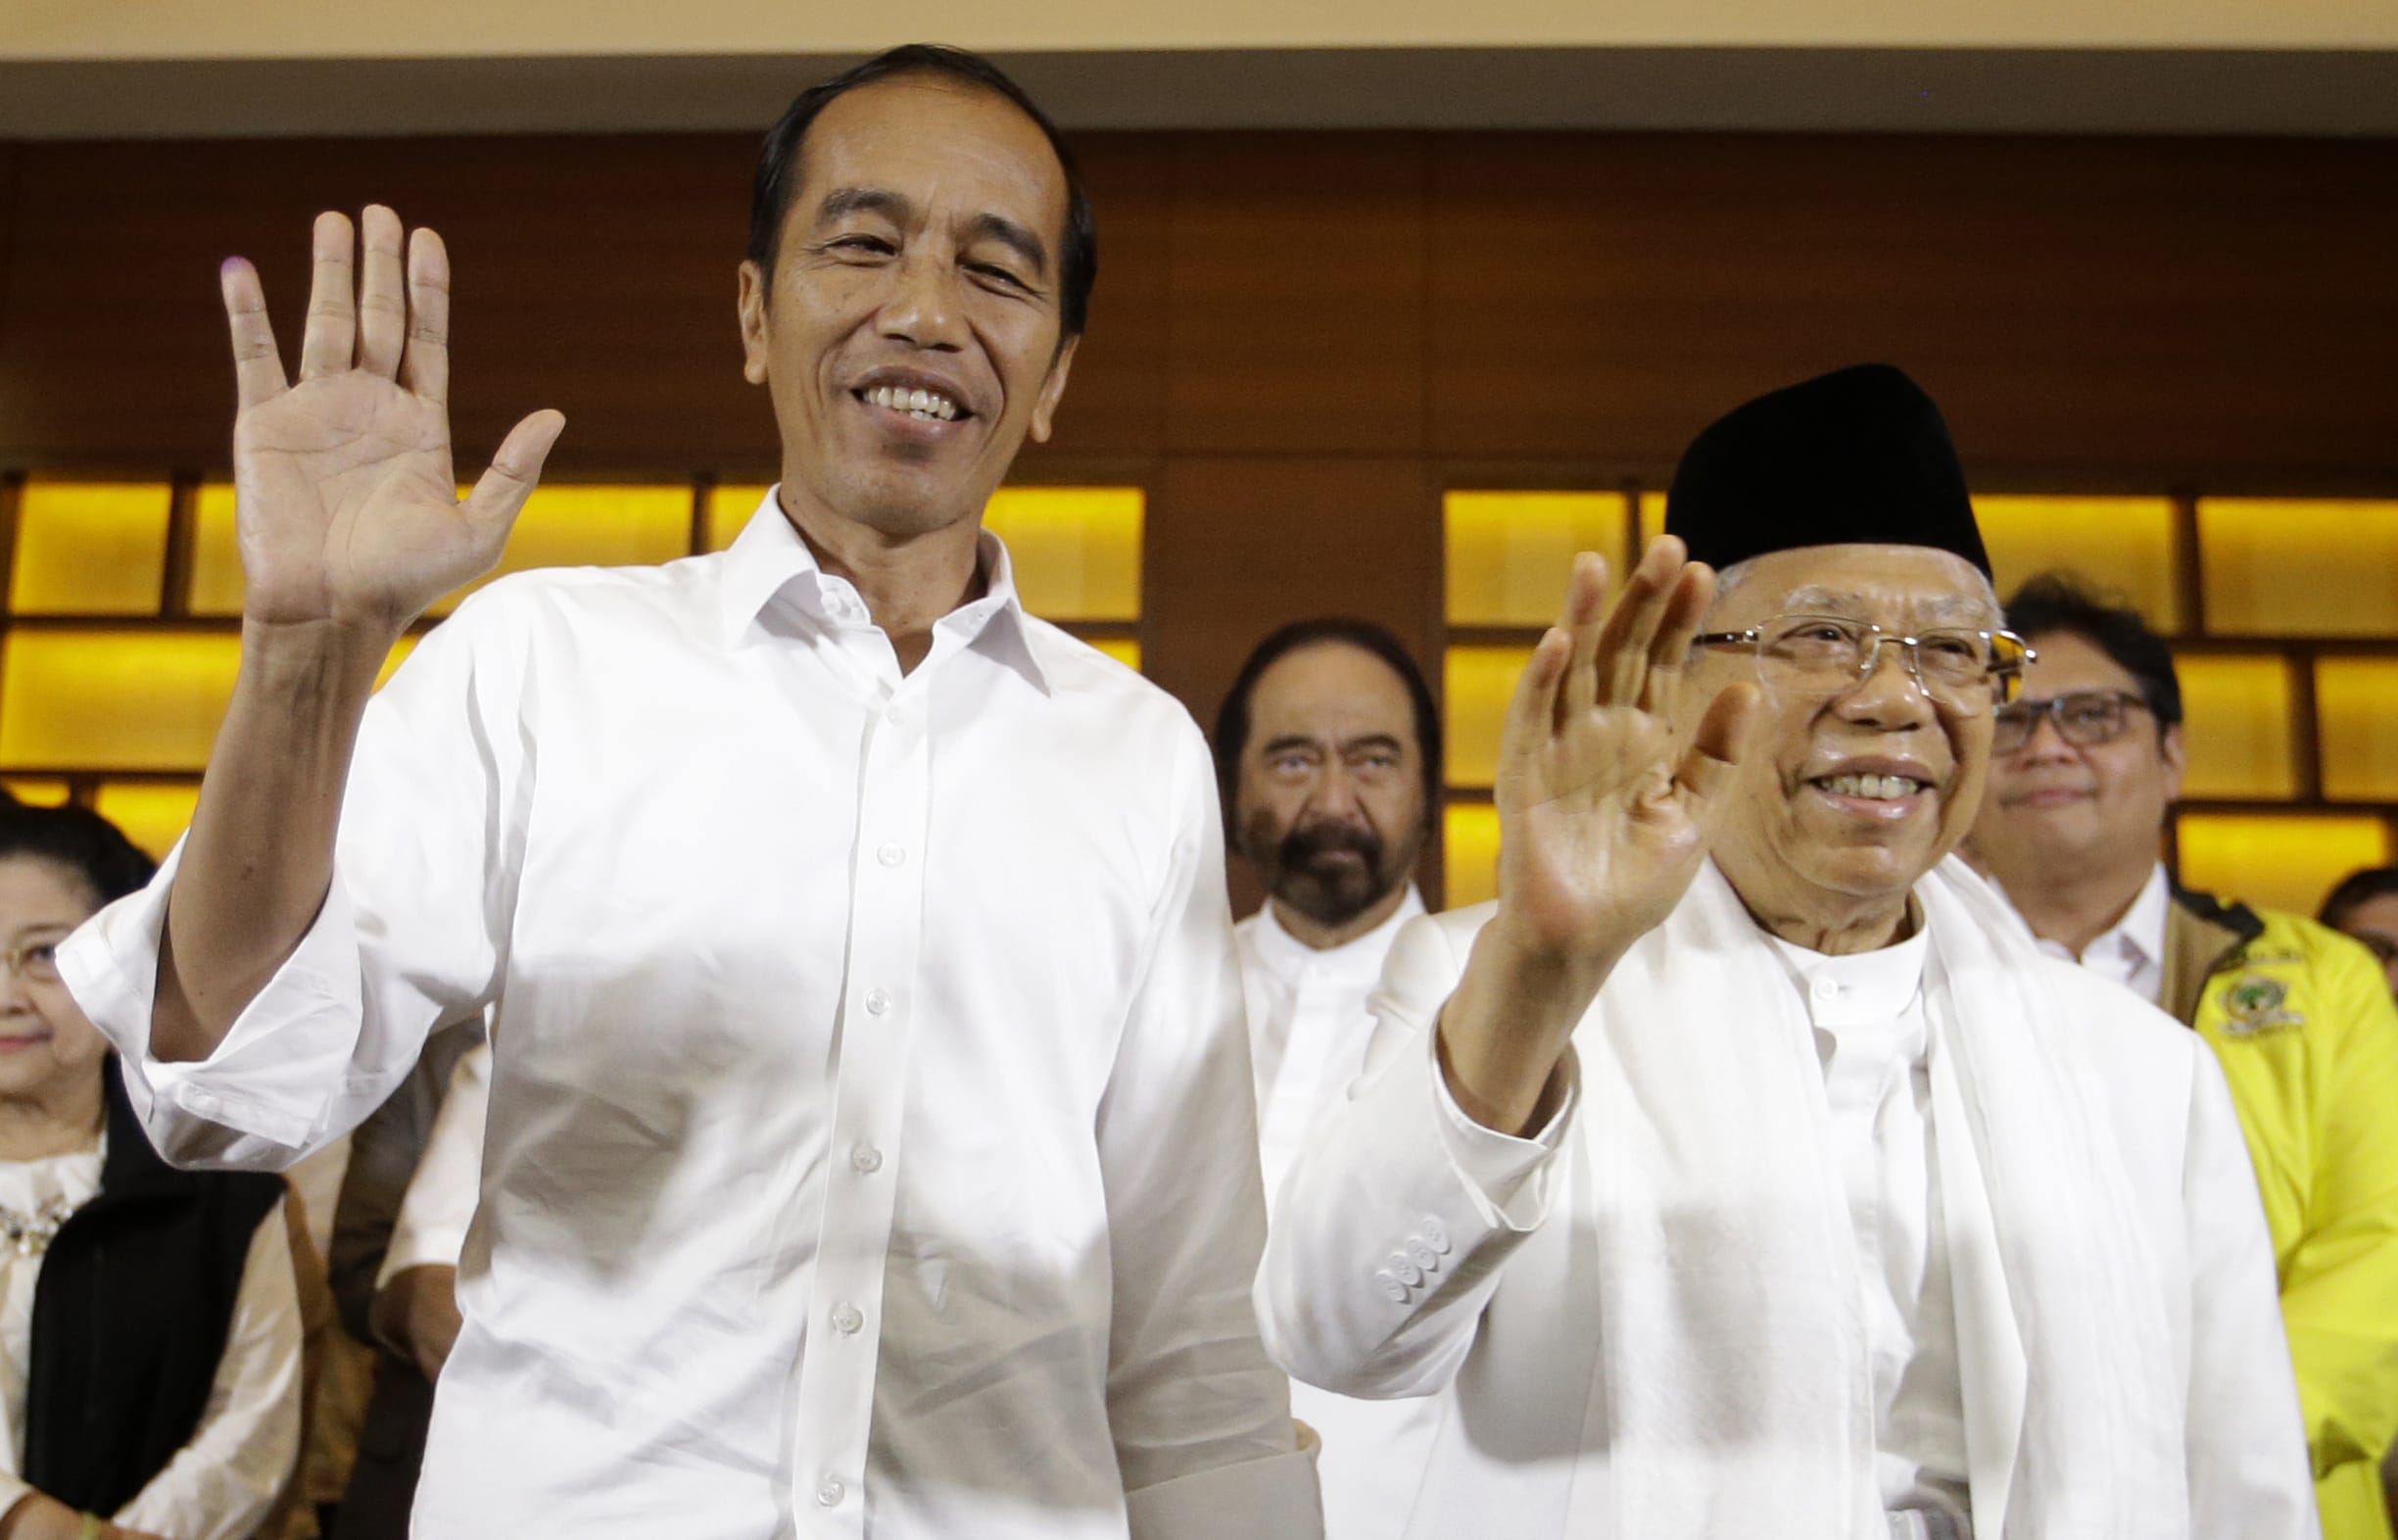 Indonesian President Joko Widodo, left, and his running mate Ma'ruf Amin wave after a press conference in Jakarta, Indonesia, on 17 April, 2019.